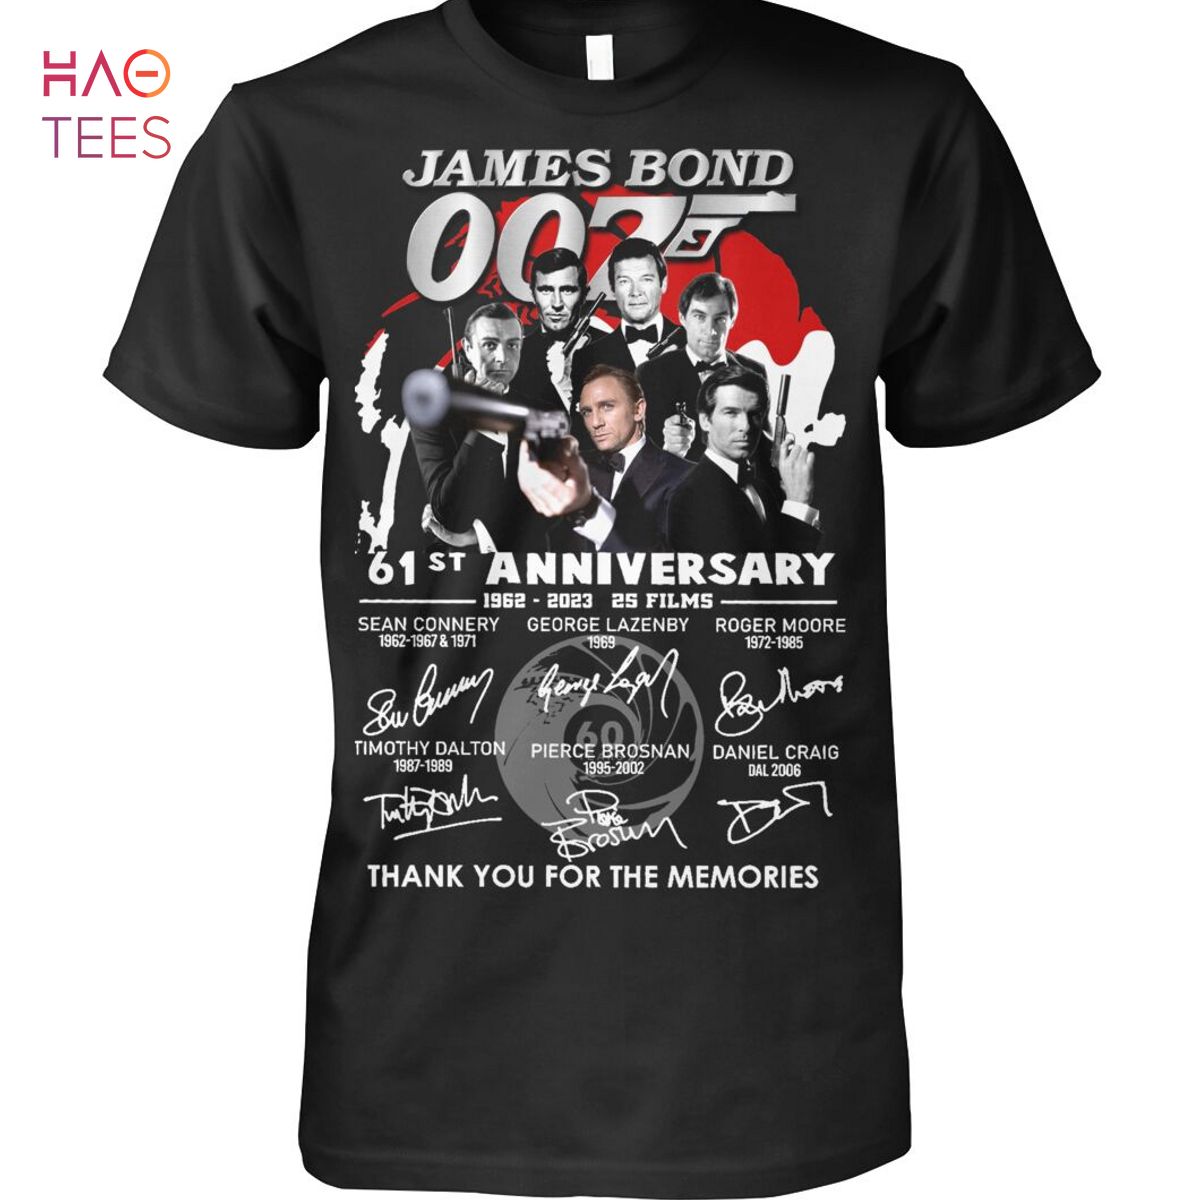 James Bond 007 61 Years Shirt Limited Edition